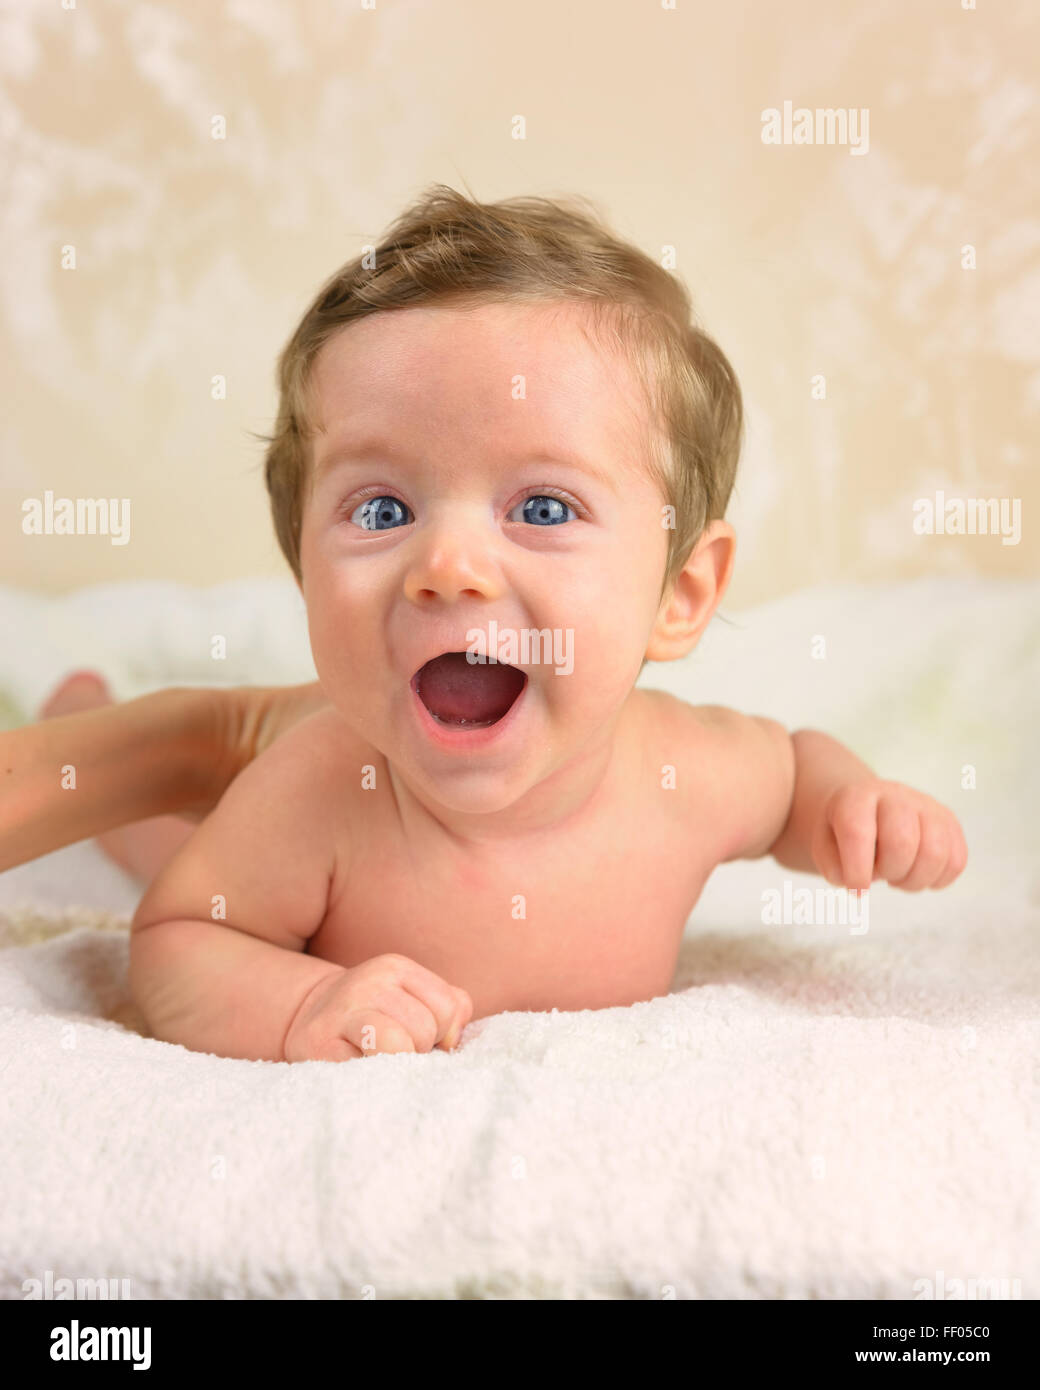 Cute infant boy lie prone and smiling. Stock Photo